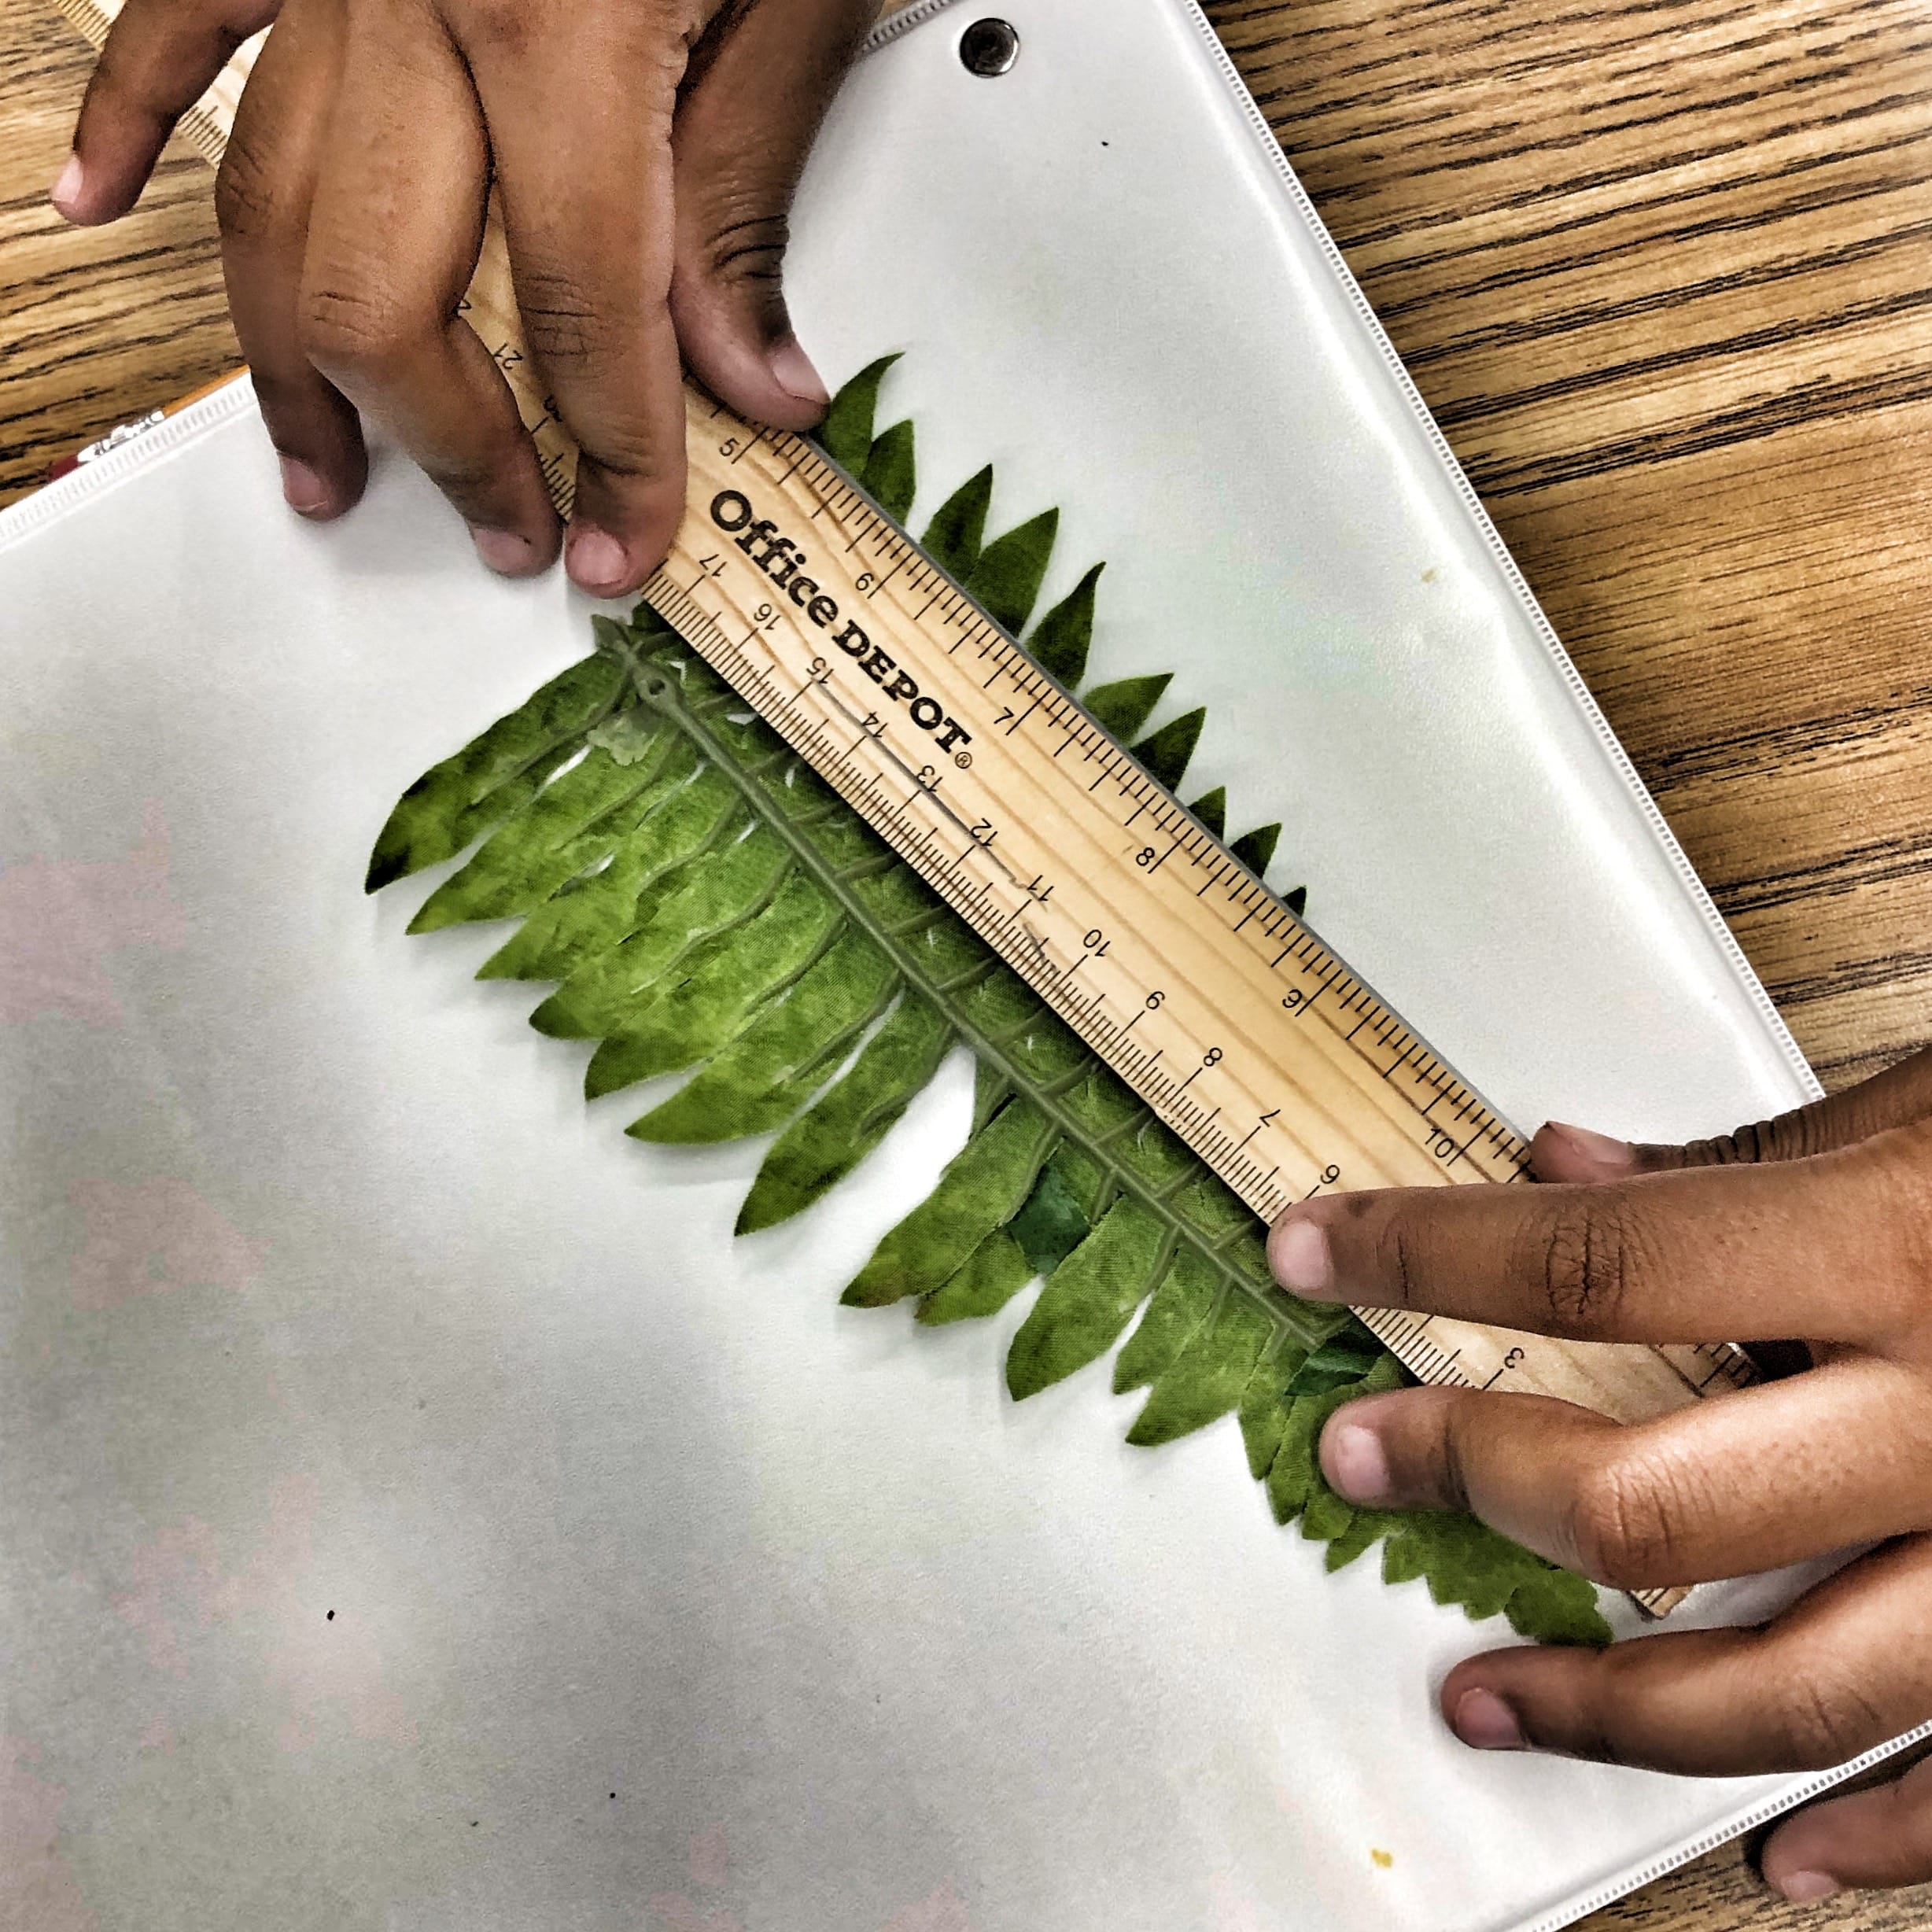 A student measures the length of a leaf